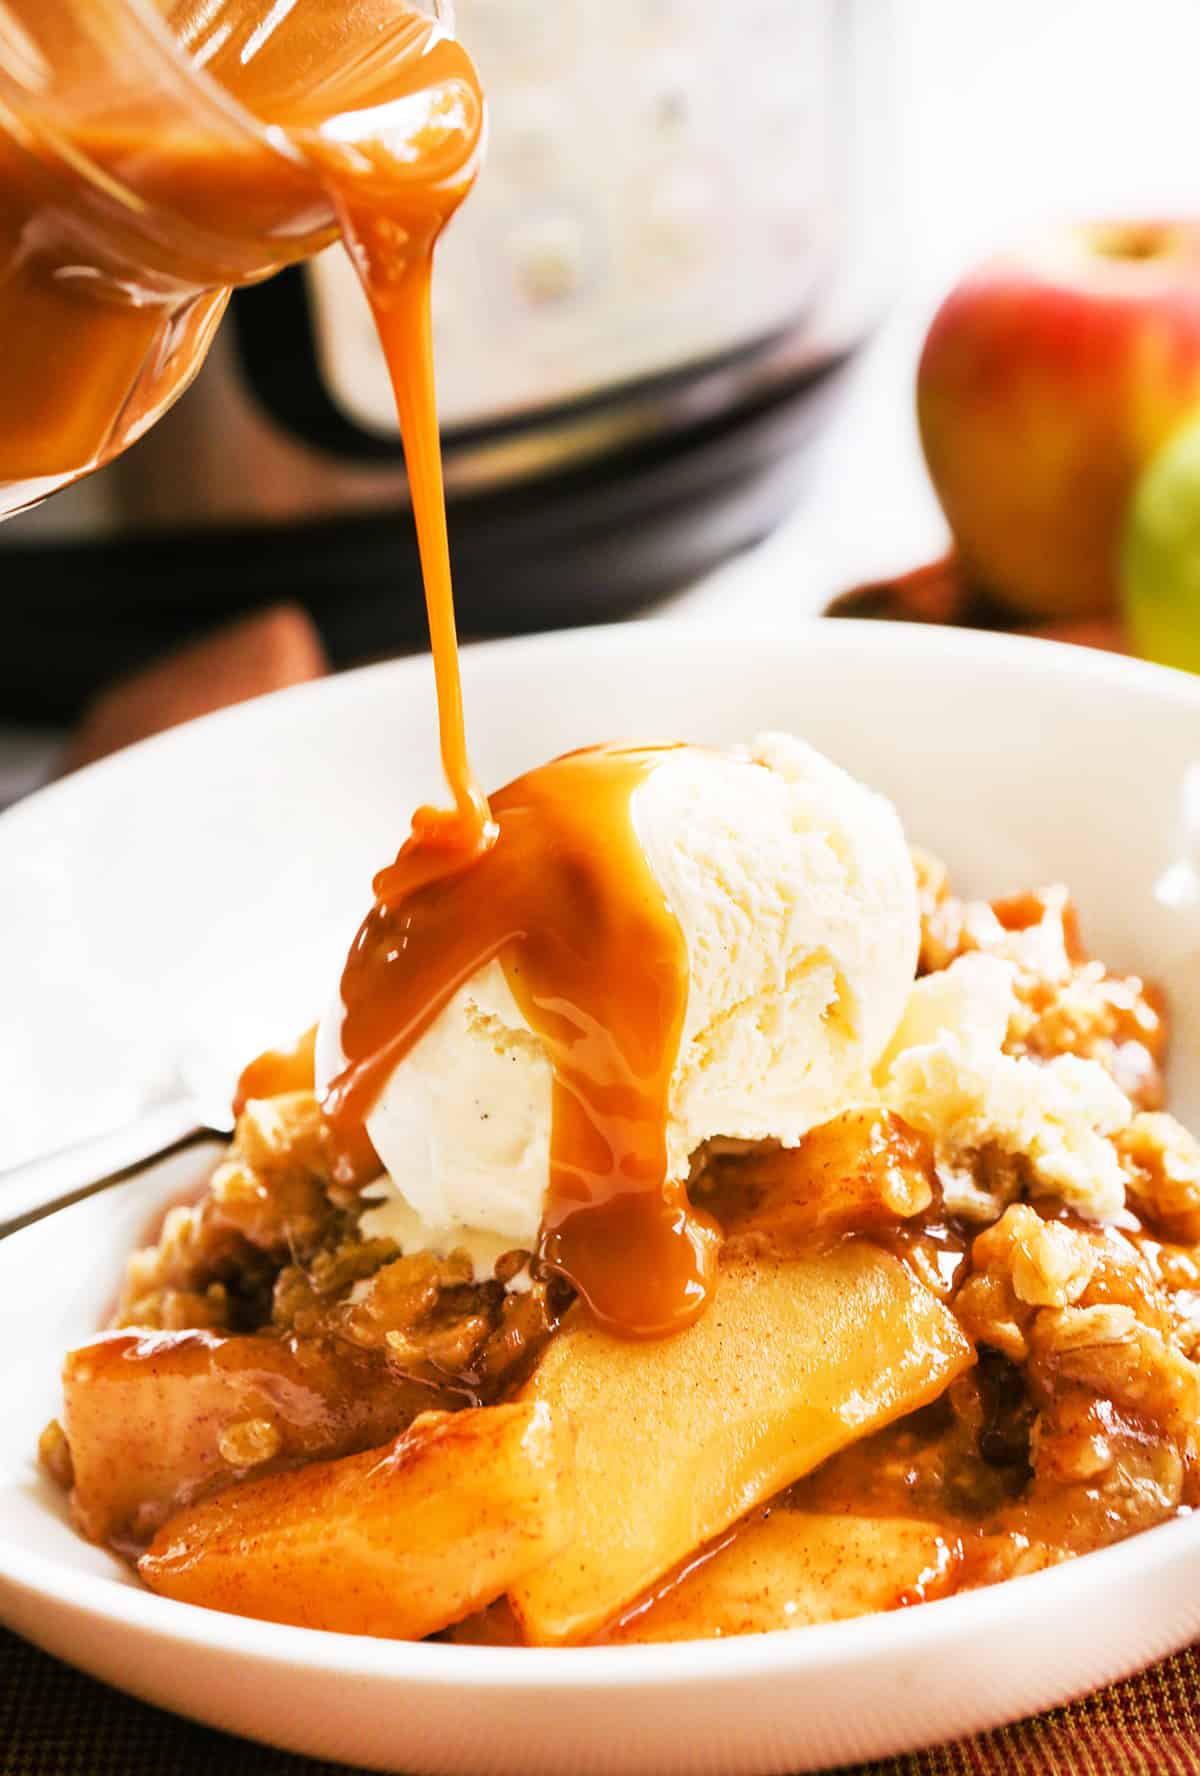 caramel being drizzled over helping of Instant Pot apple crisp,